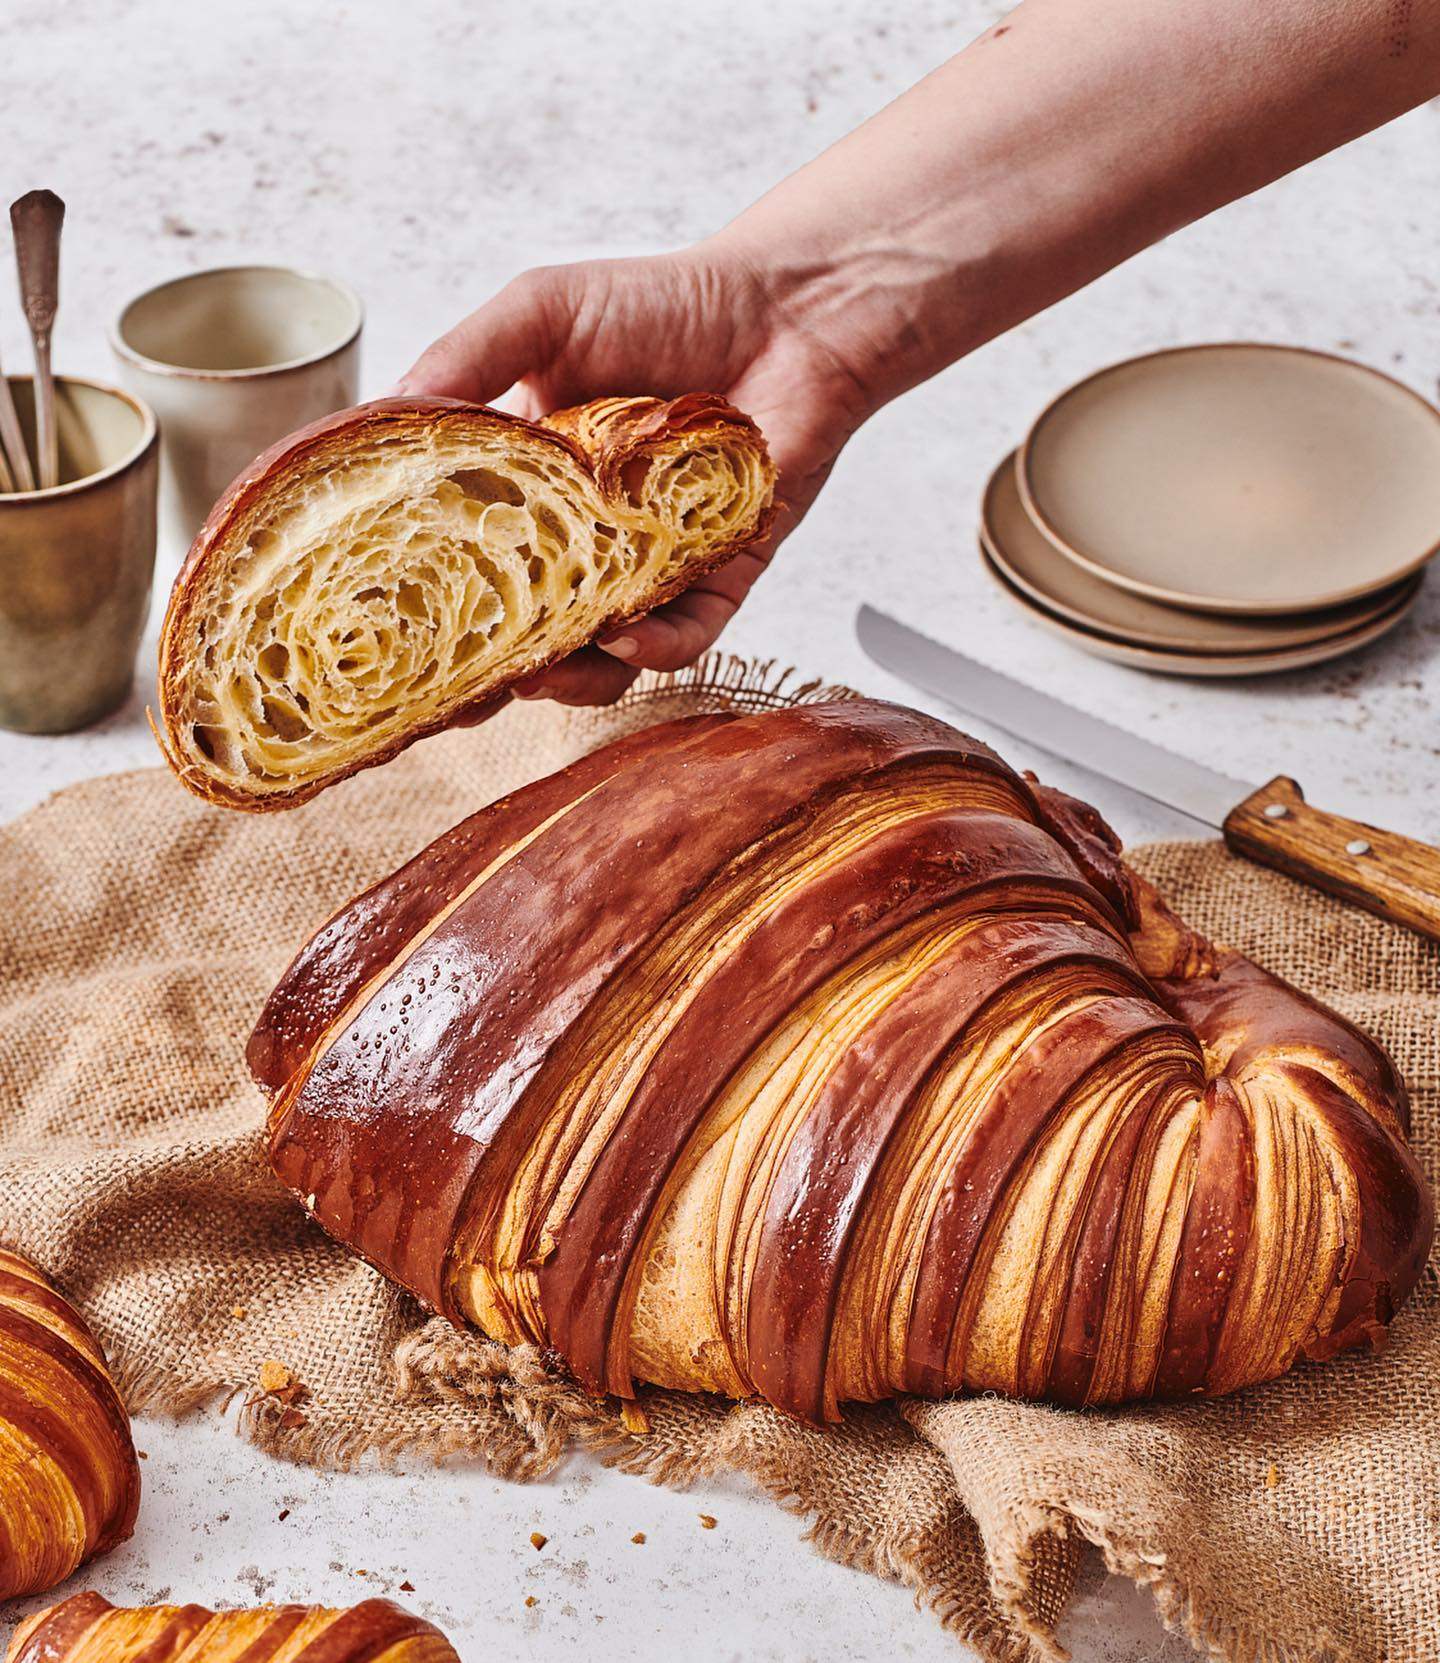 Hong Kong bakeries are hopping on the oversized baked goods trend started by French chef Philippe Conticini (one of his pastries is pictured). Photo:  Instagram/@philippe_conticini